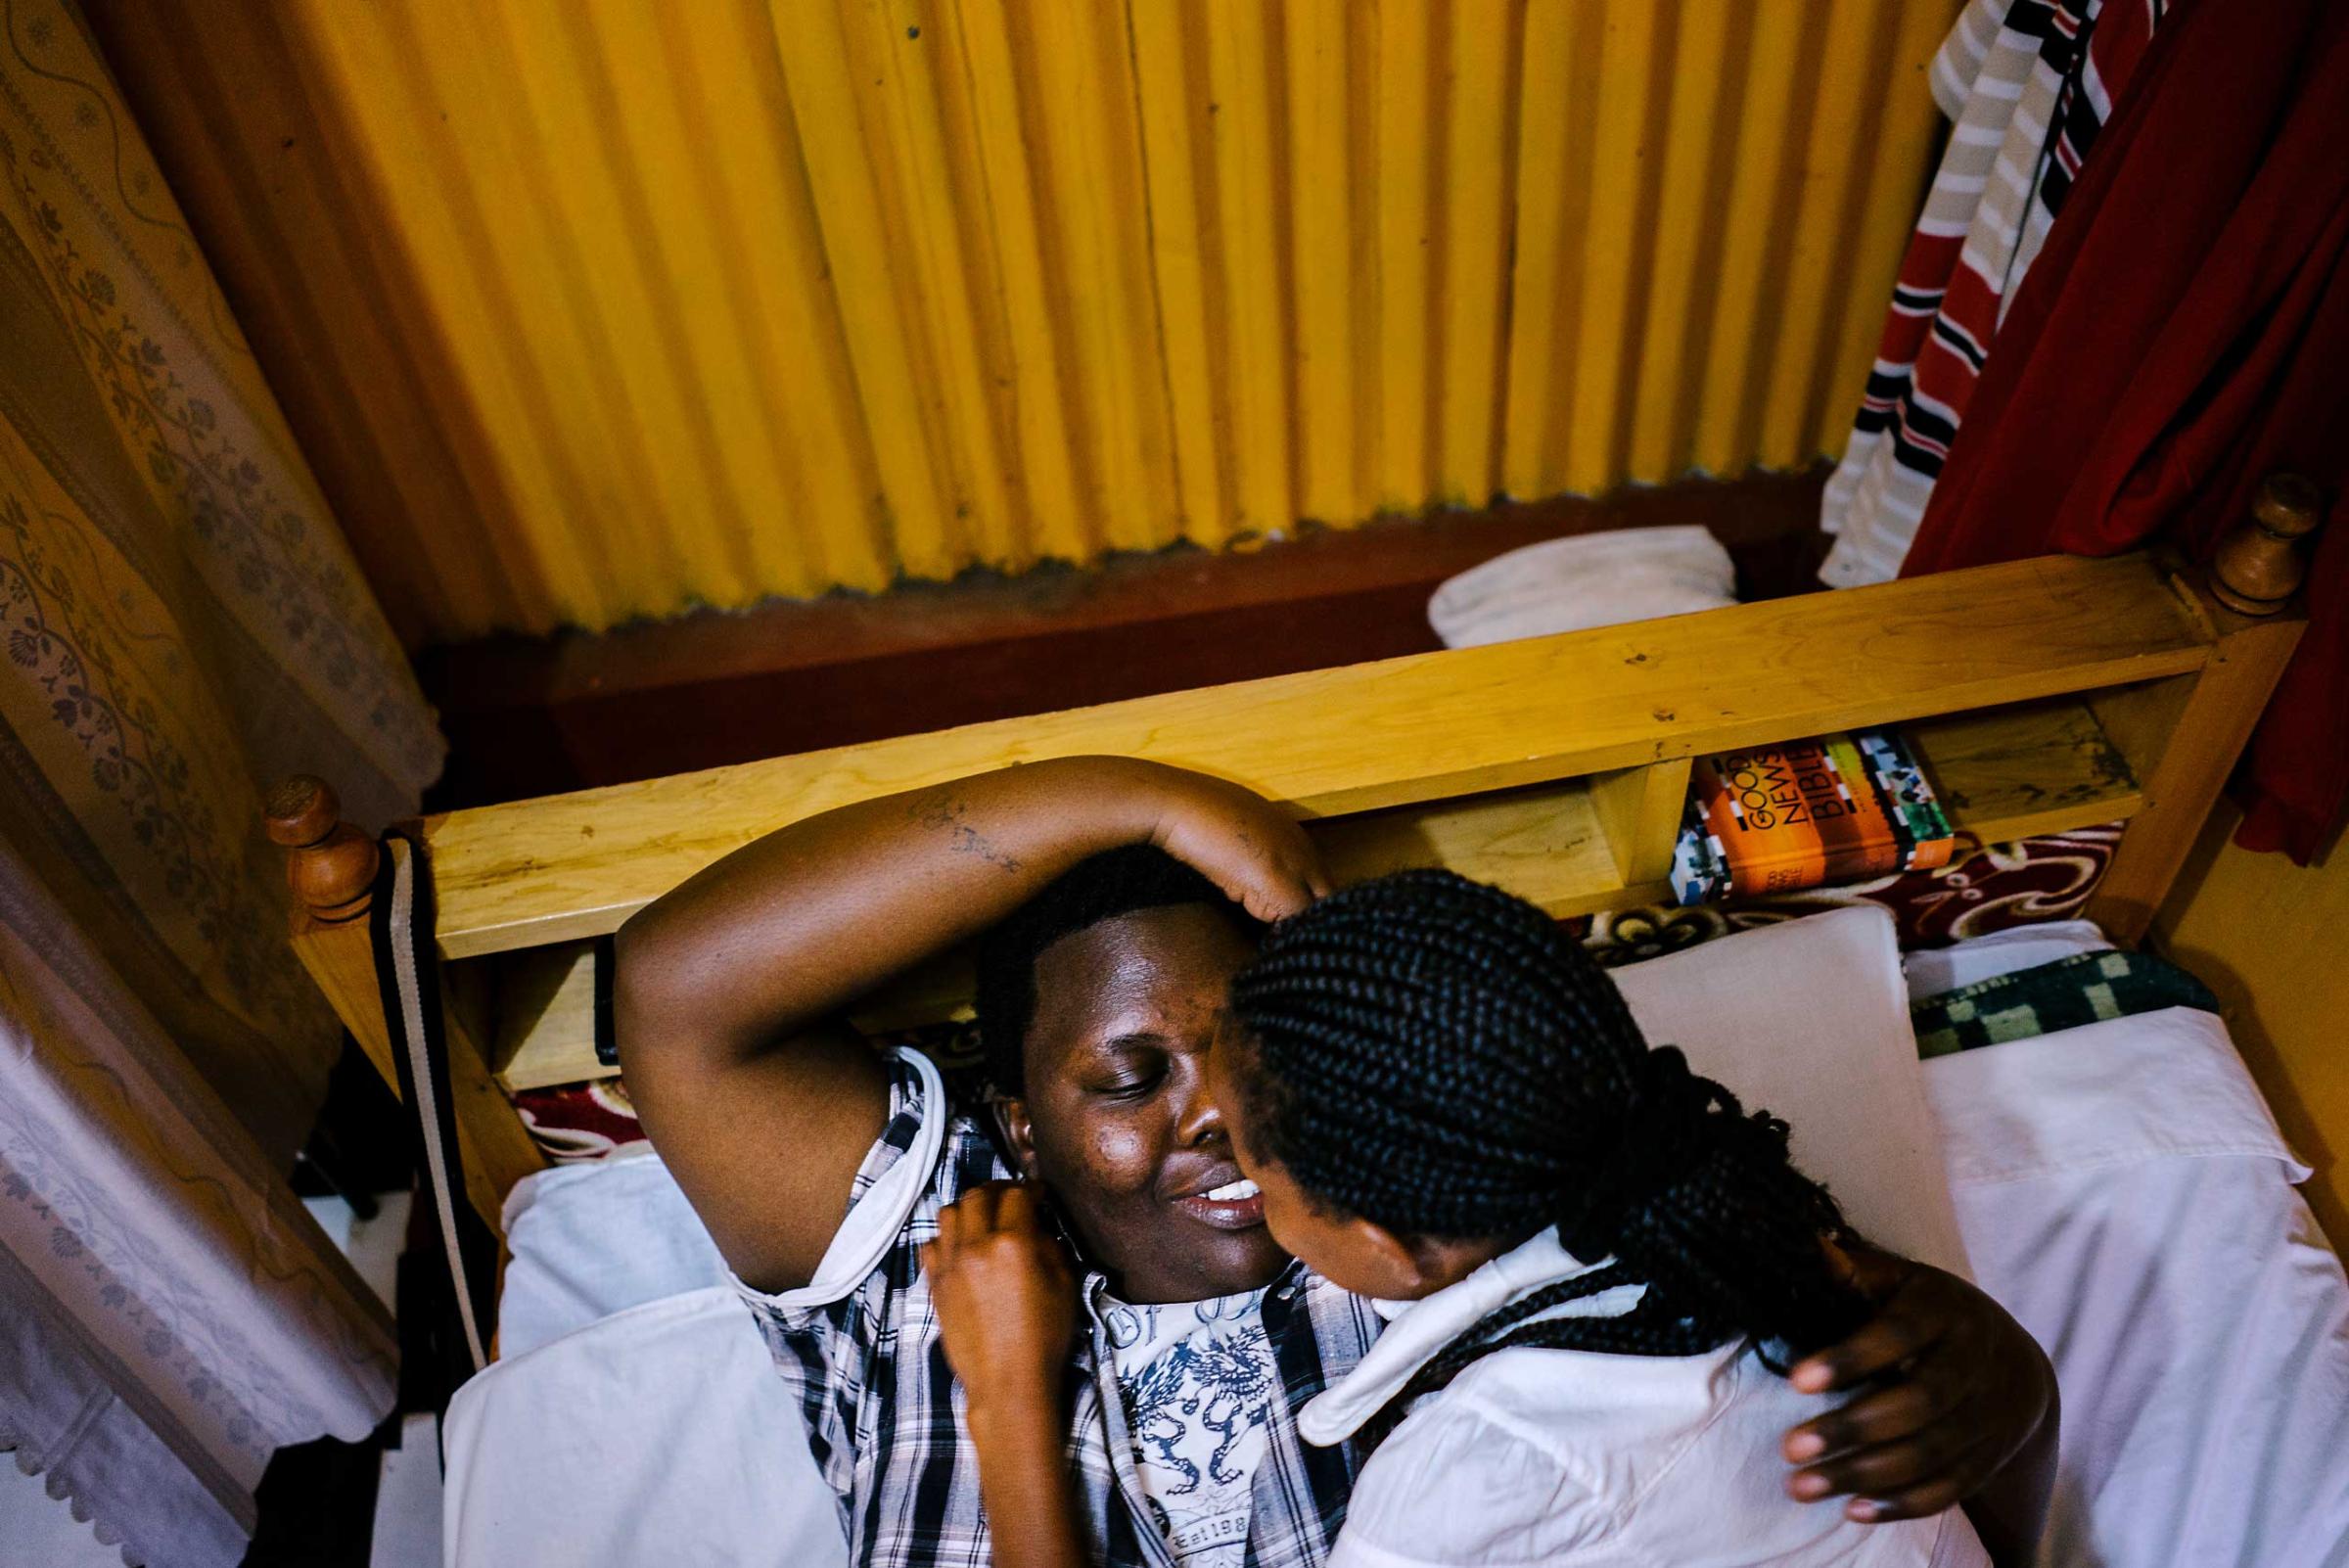 Cynthia is a lesbian activist and refugee from Burundi. She fled her country after authorities found out she was gay. They beat her and cut her with machetes. Here, she lays in bed with her Kenyan girlfriend in the apartment the two shared in Nairobi, Kenya (though they have since moved). Cynthia is due to be resettled in the United States any day now, though that has been the case for months.